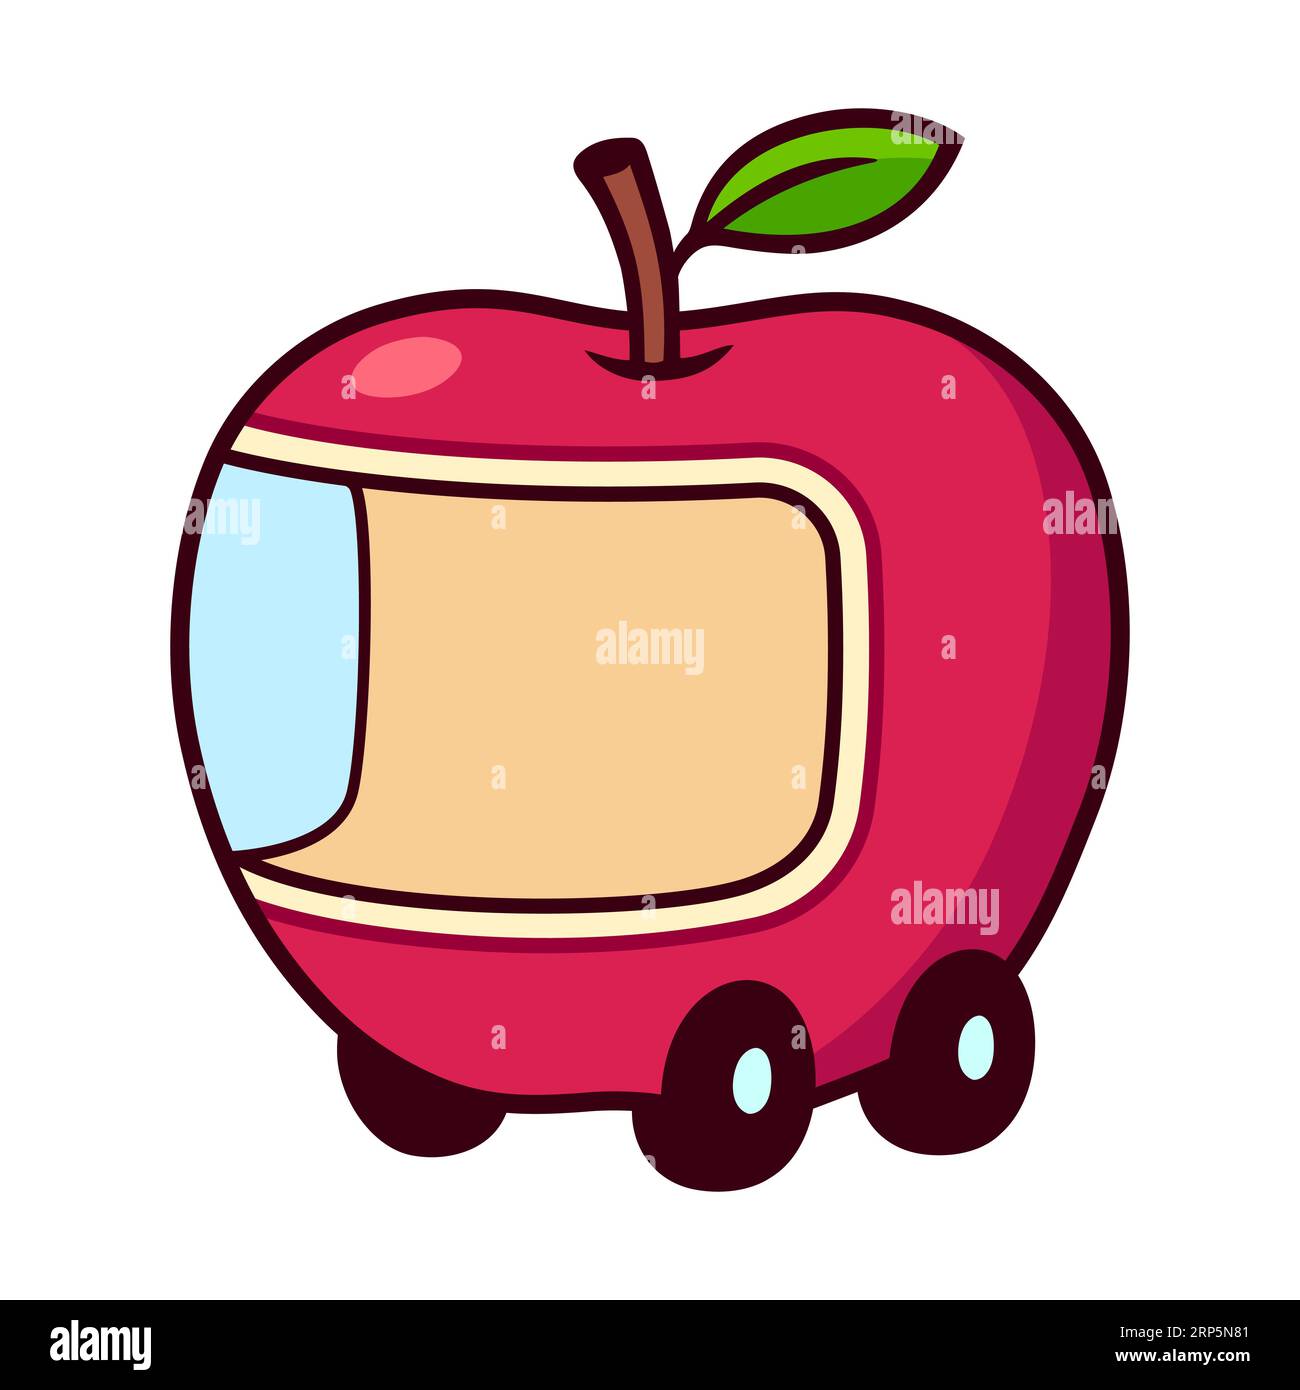 Cute cartoon red apple shaped car drawing. Funny children's toy vector clip art illustration. Stock Vector